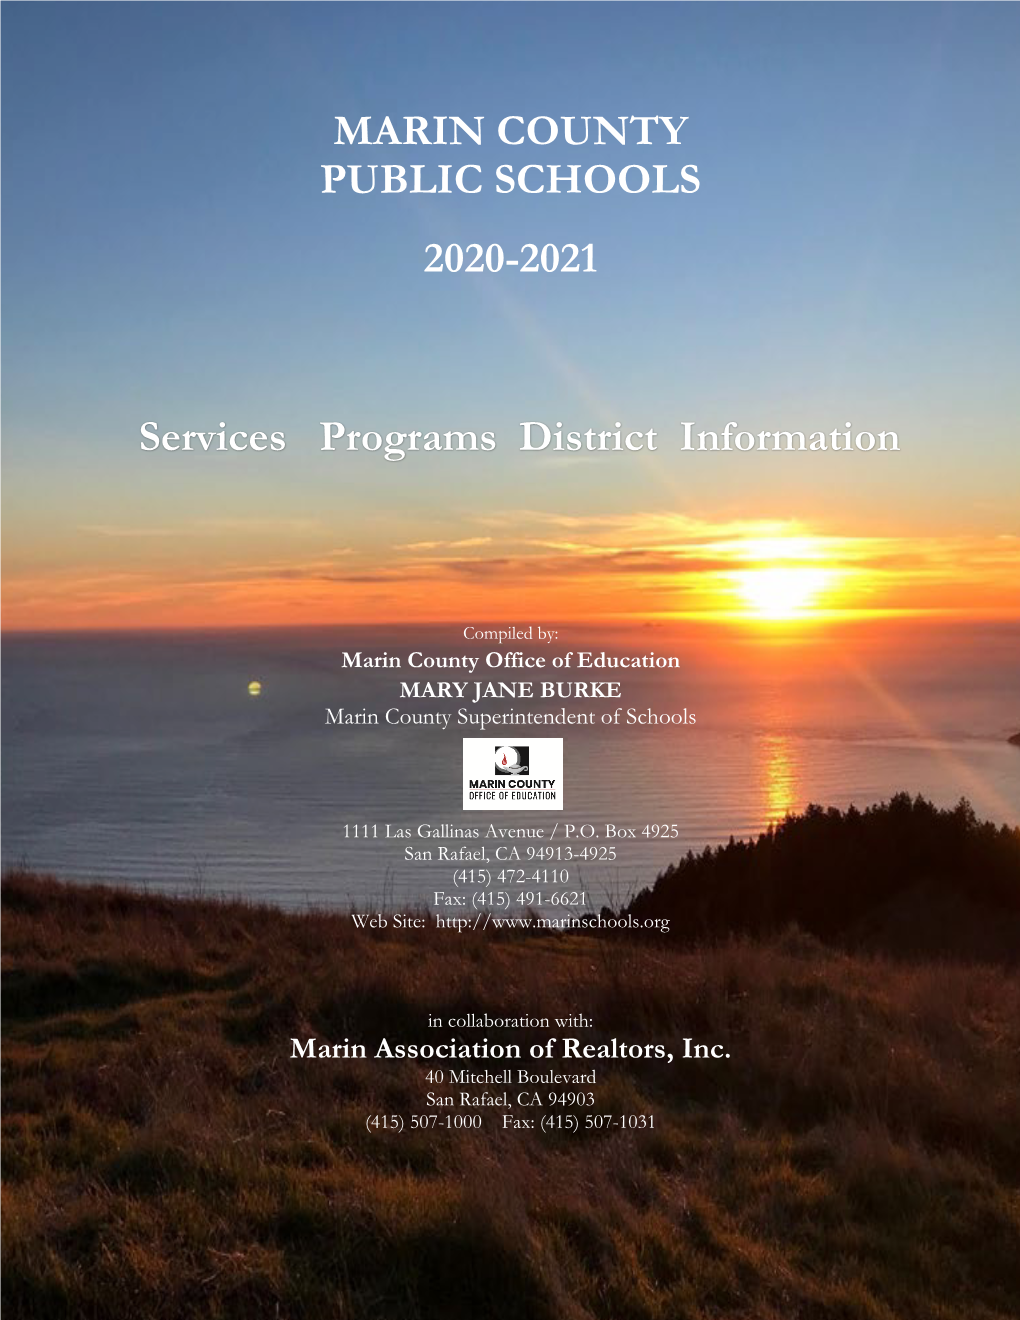 Facts About Education in Marin County Schools